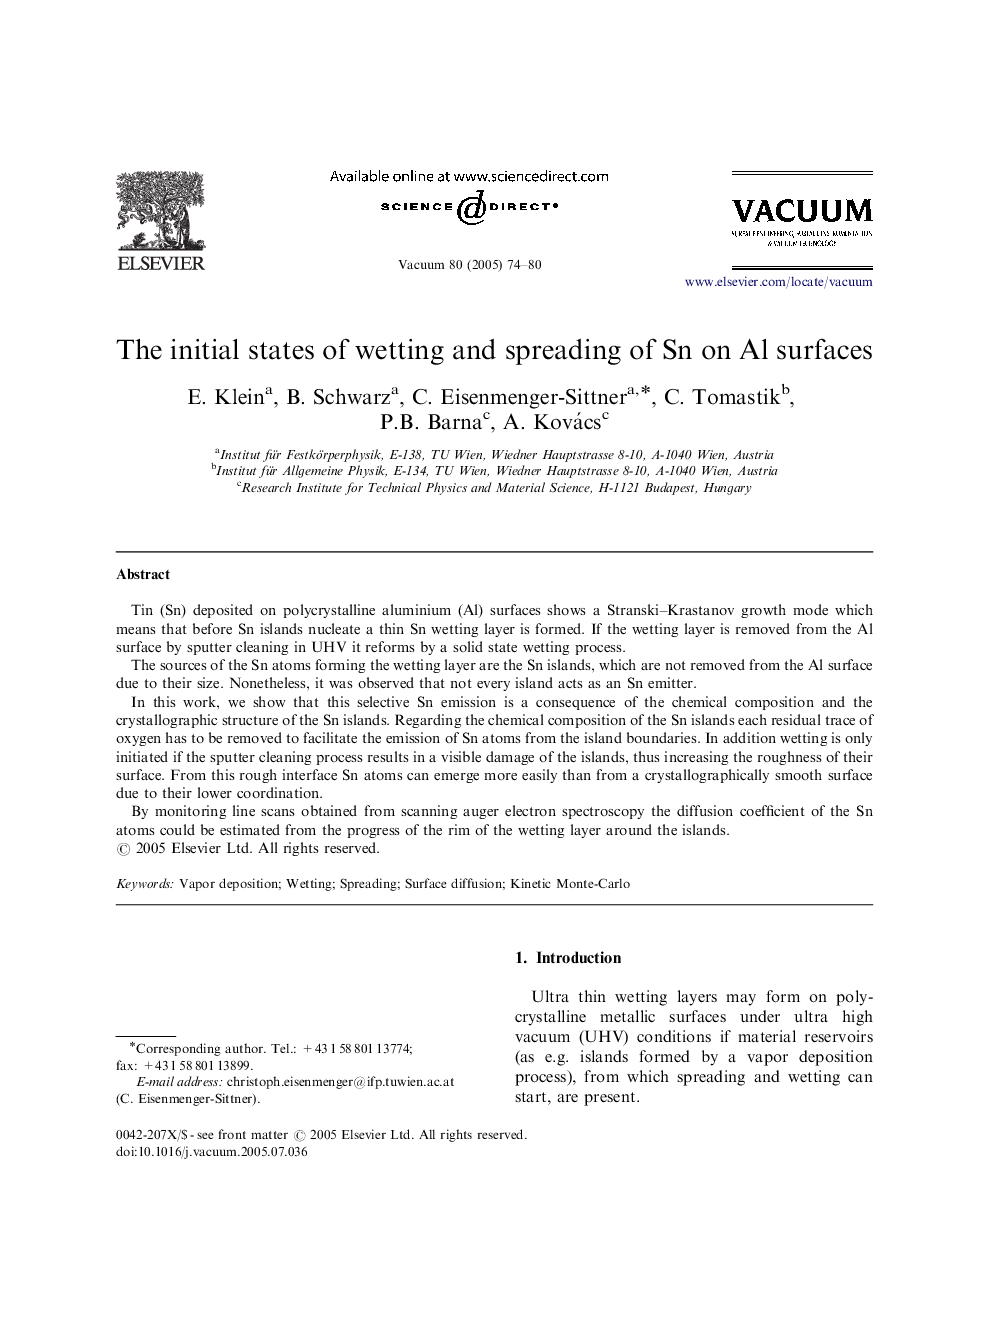 The initial states of wetting and spreading of Sn on Al surfaces